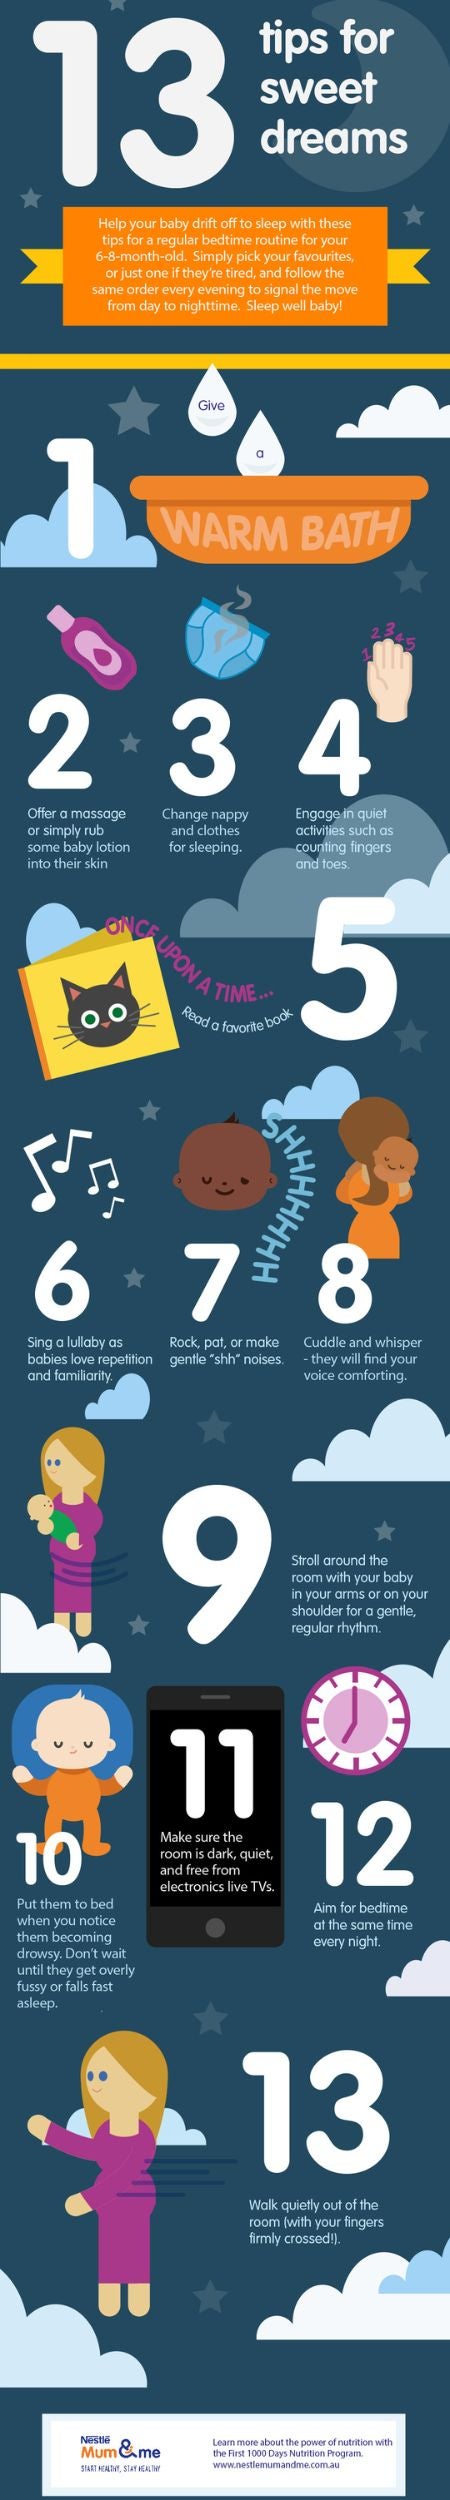 13 tips for babys sweet dreams